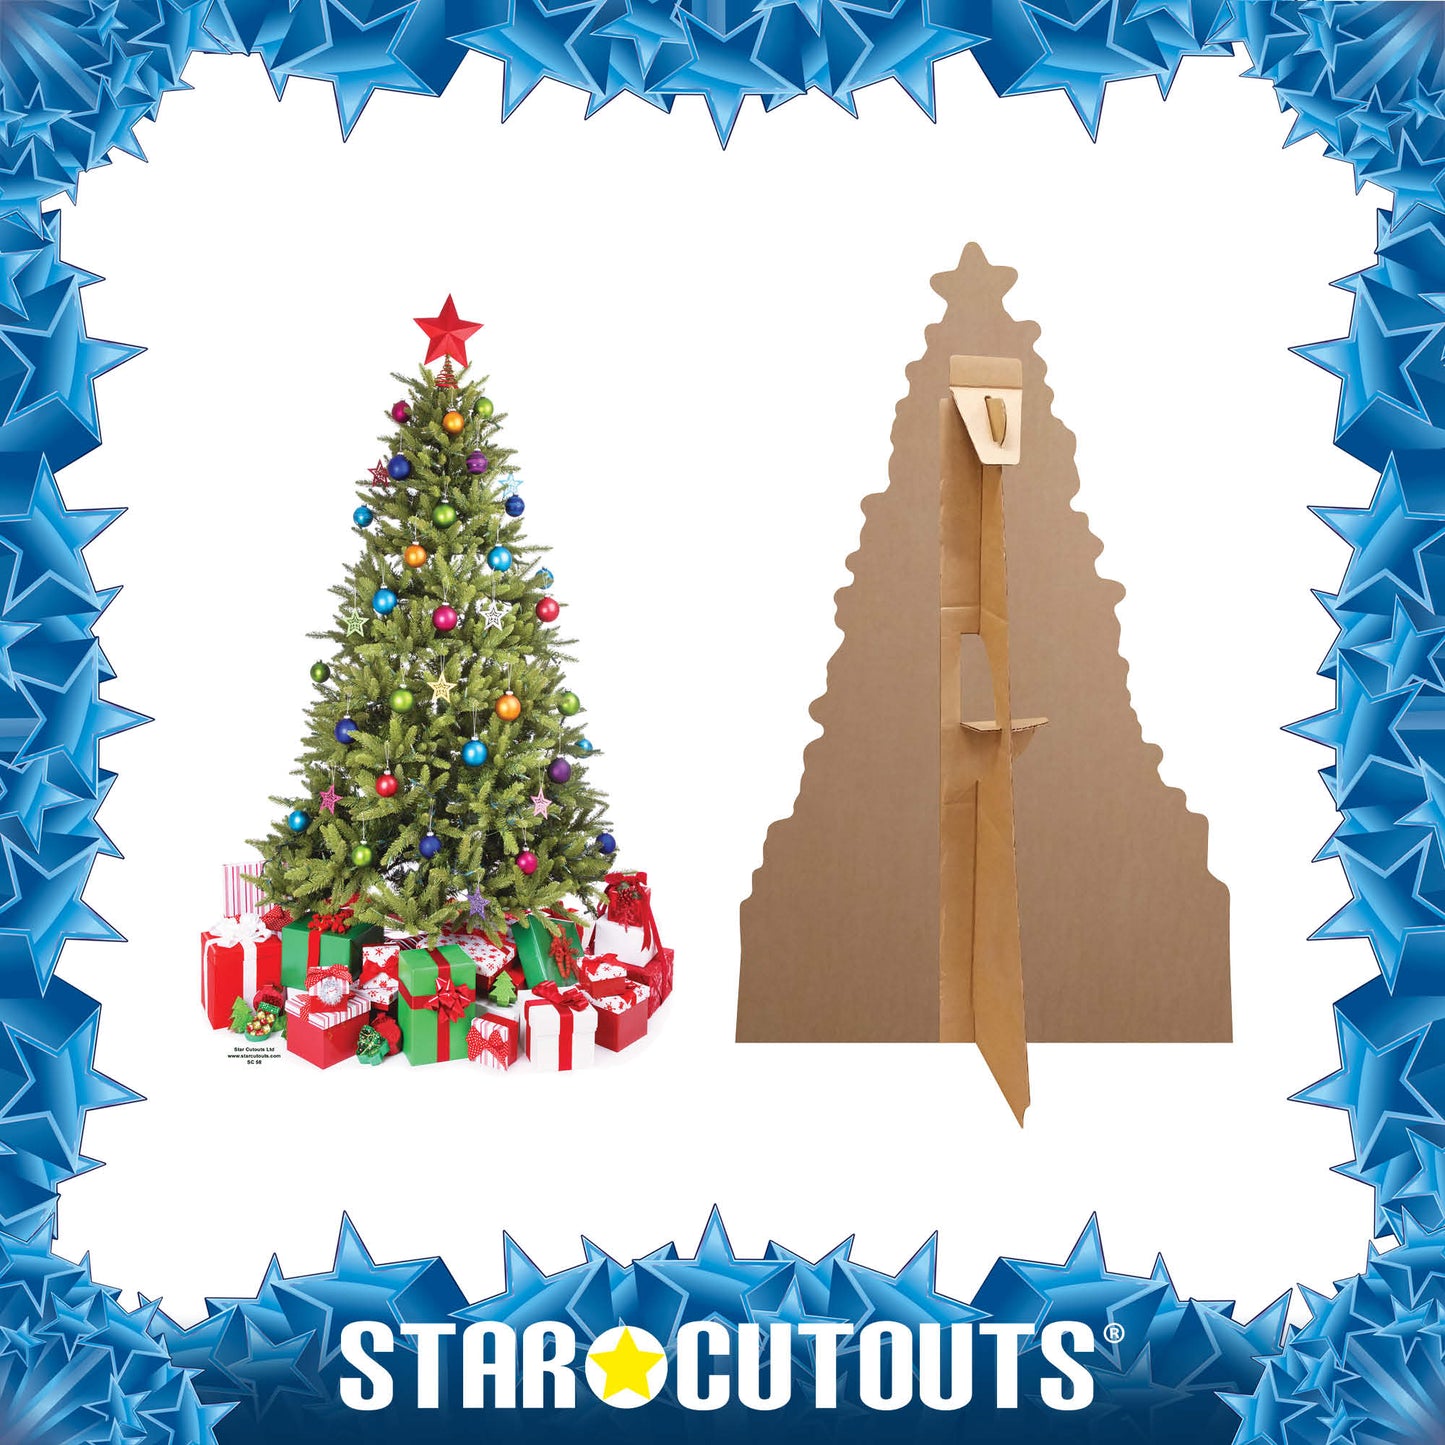 SC058 Small Christmas Tree Cardboard Cut Out Height 88cm - Star Cutouts